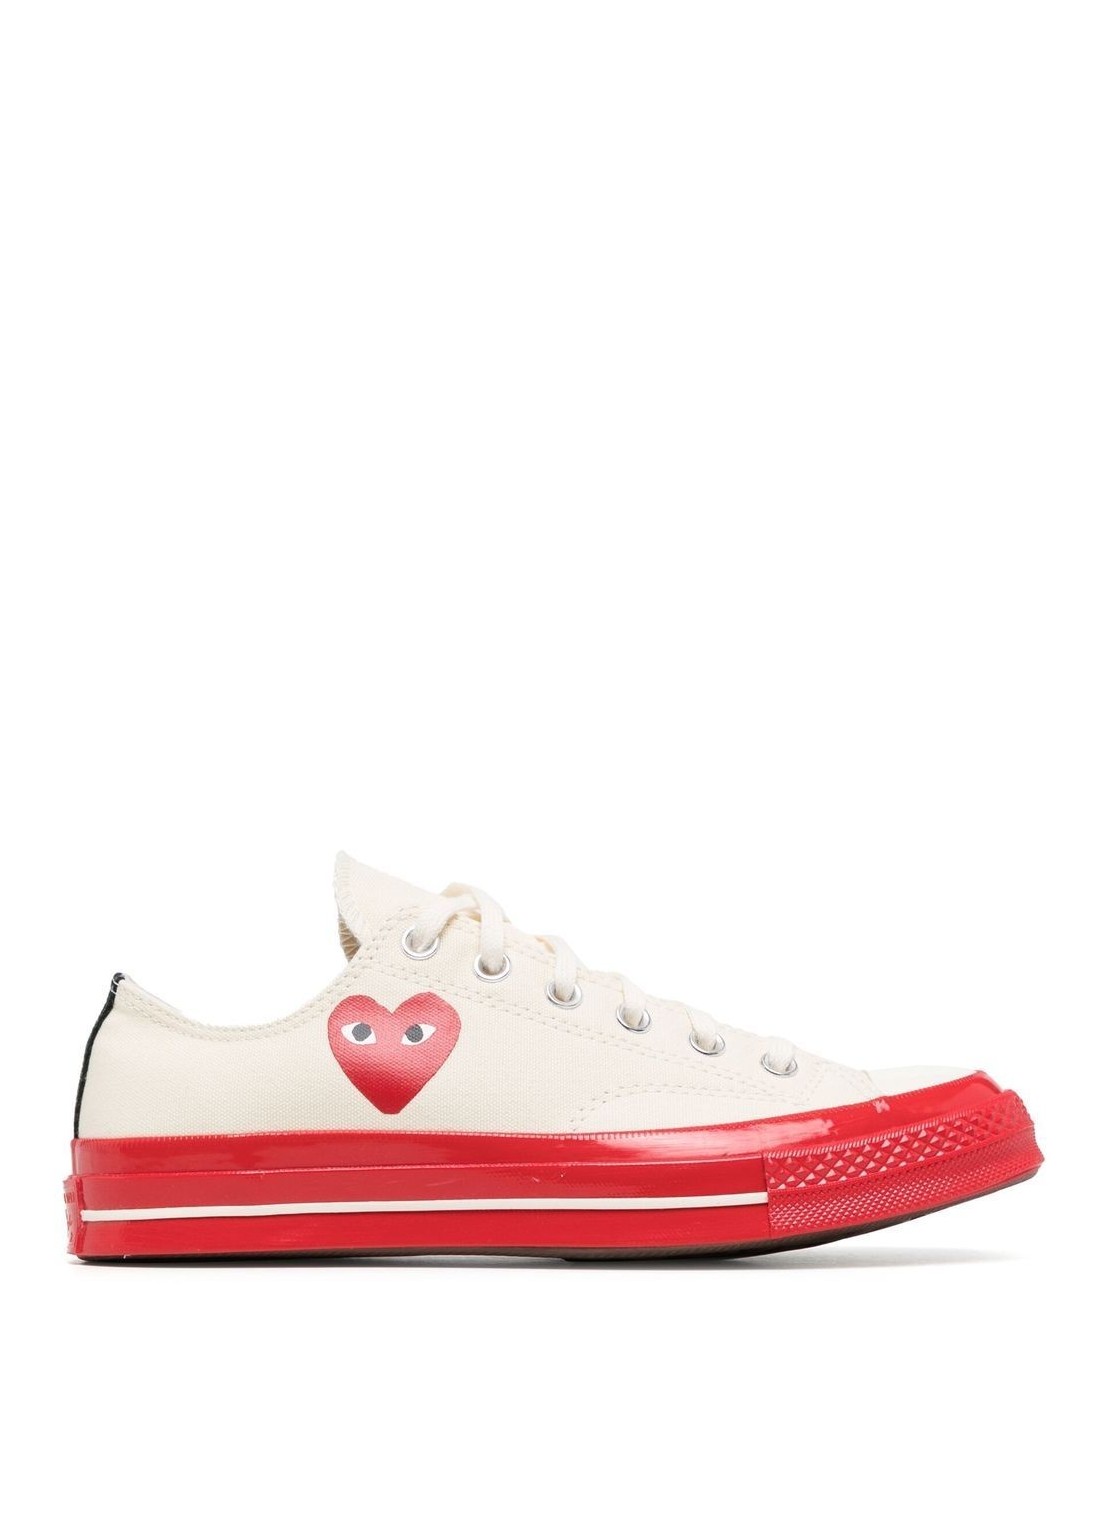 Sneaker comme des garcons converse red sole low top - p1k123 off white talla 42.5
 